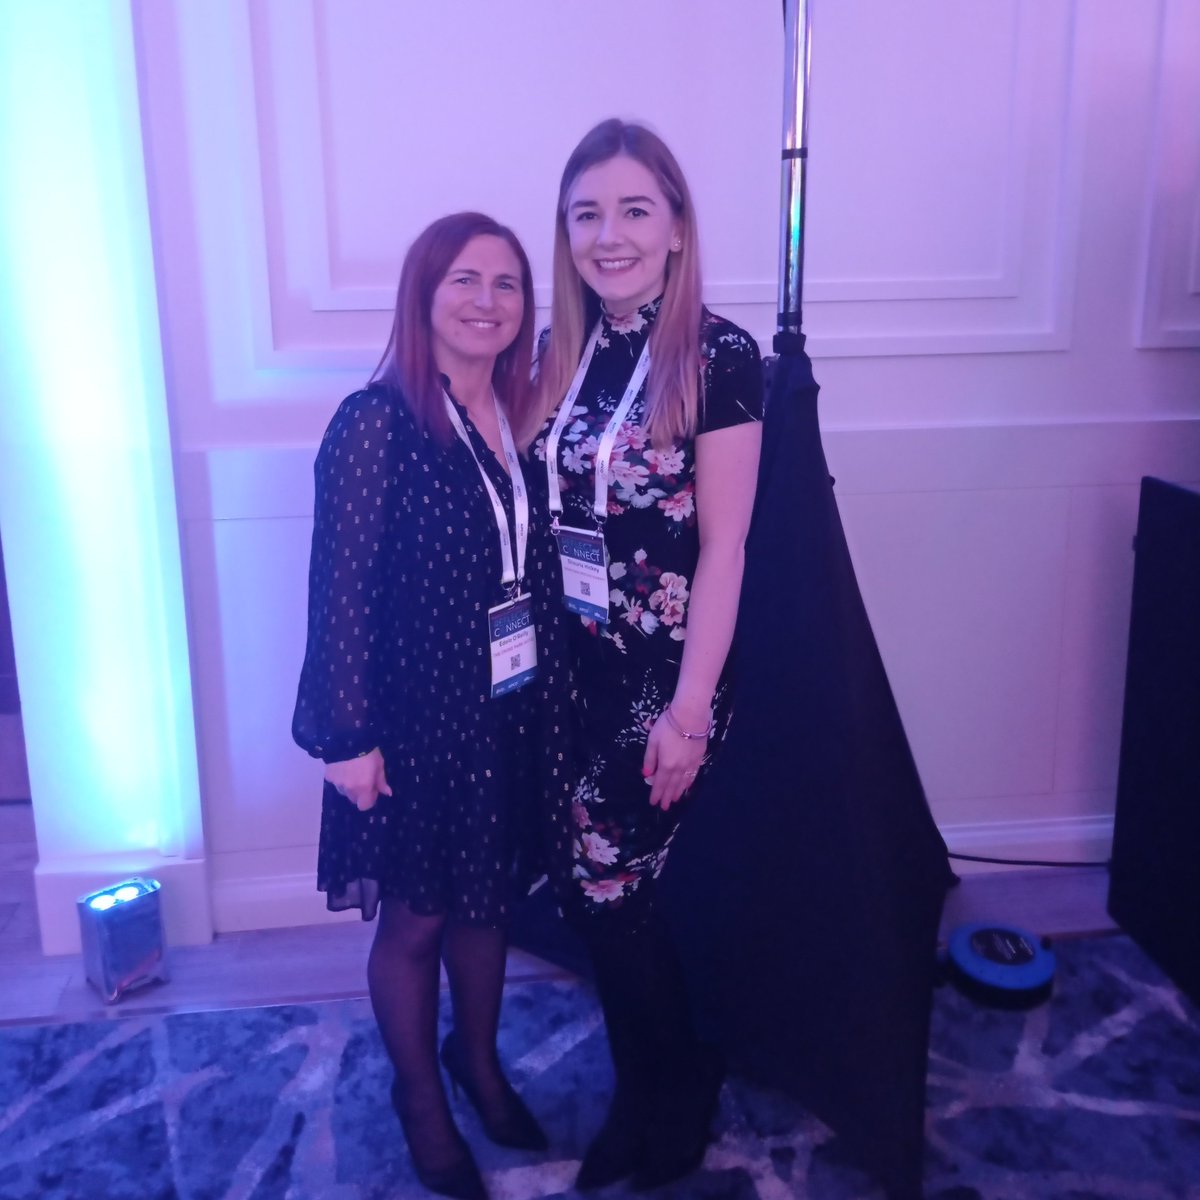 Fabulous night tonight at @FotaIsland for #AIPCO2023 Always great to represent @CrokeParkEvents What a welcome we've had so far! Looking forward to the day's events tomorrow.